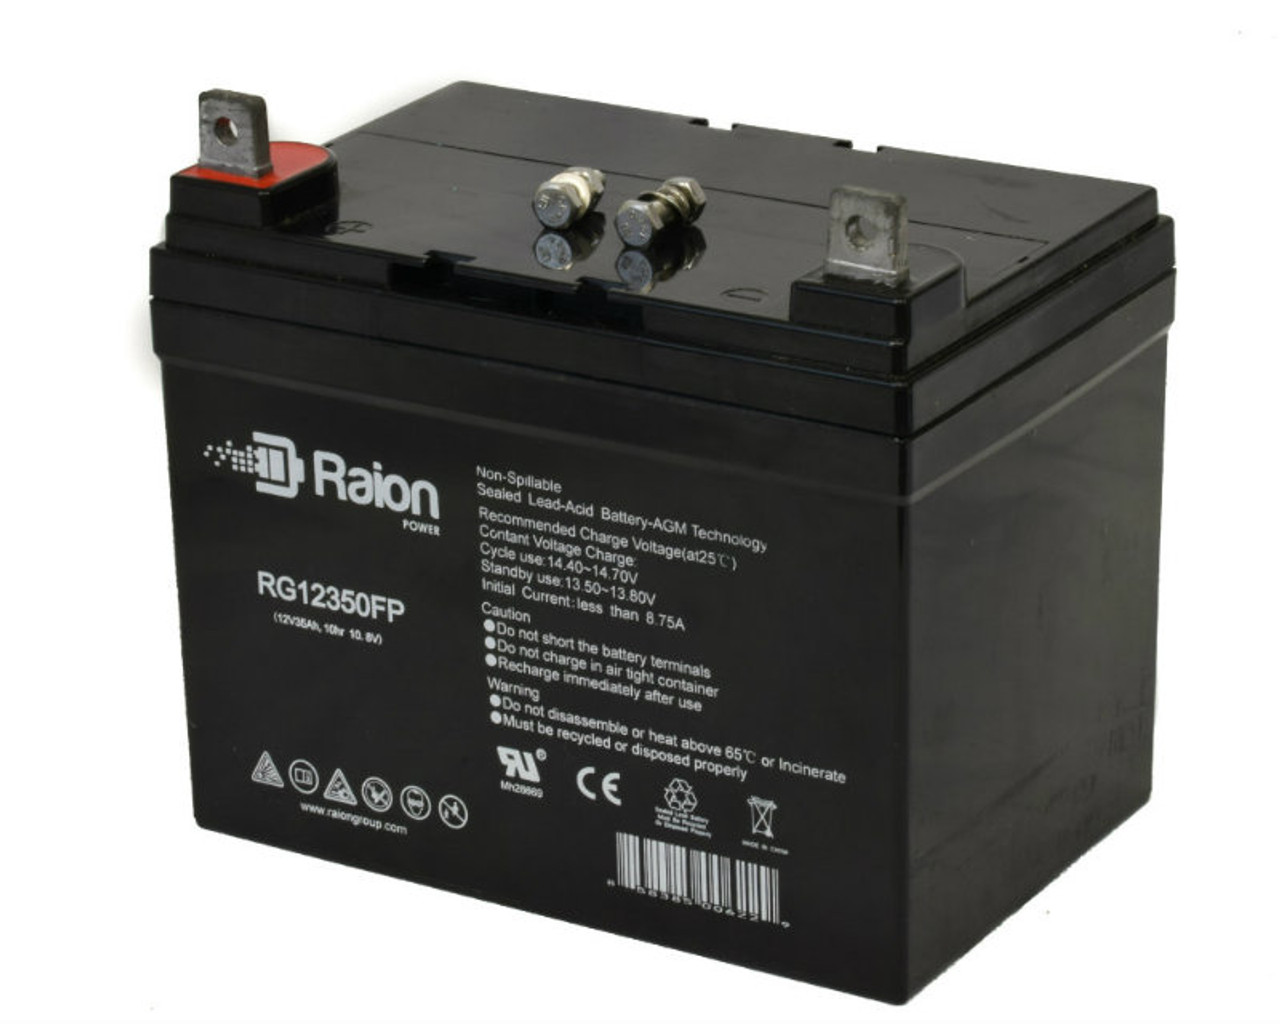 Raion Power Replacement 12V 35Ah RG12350FP Battery for Case International 117